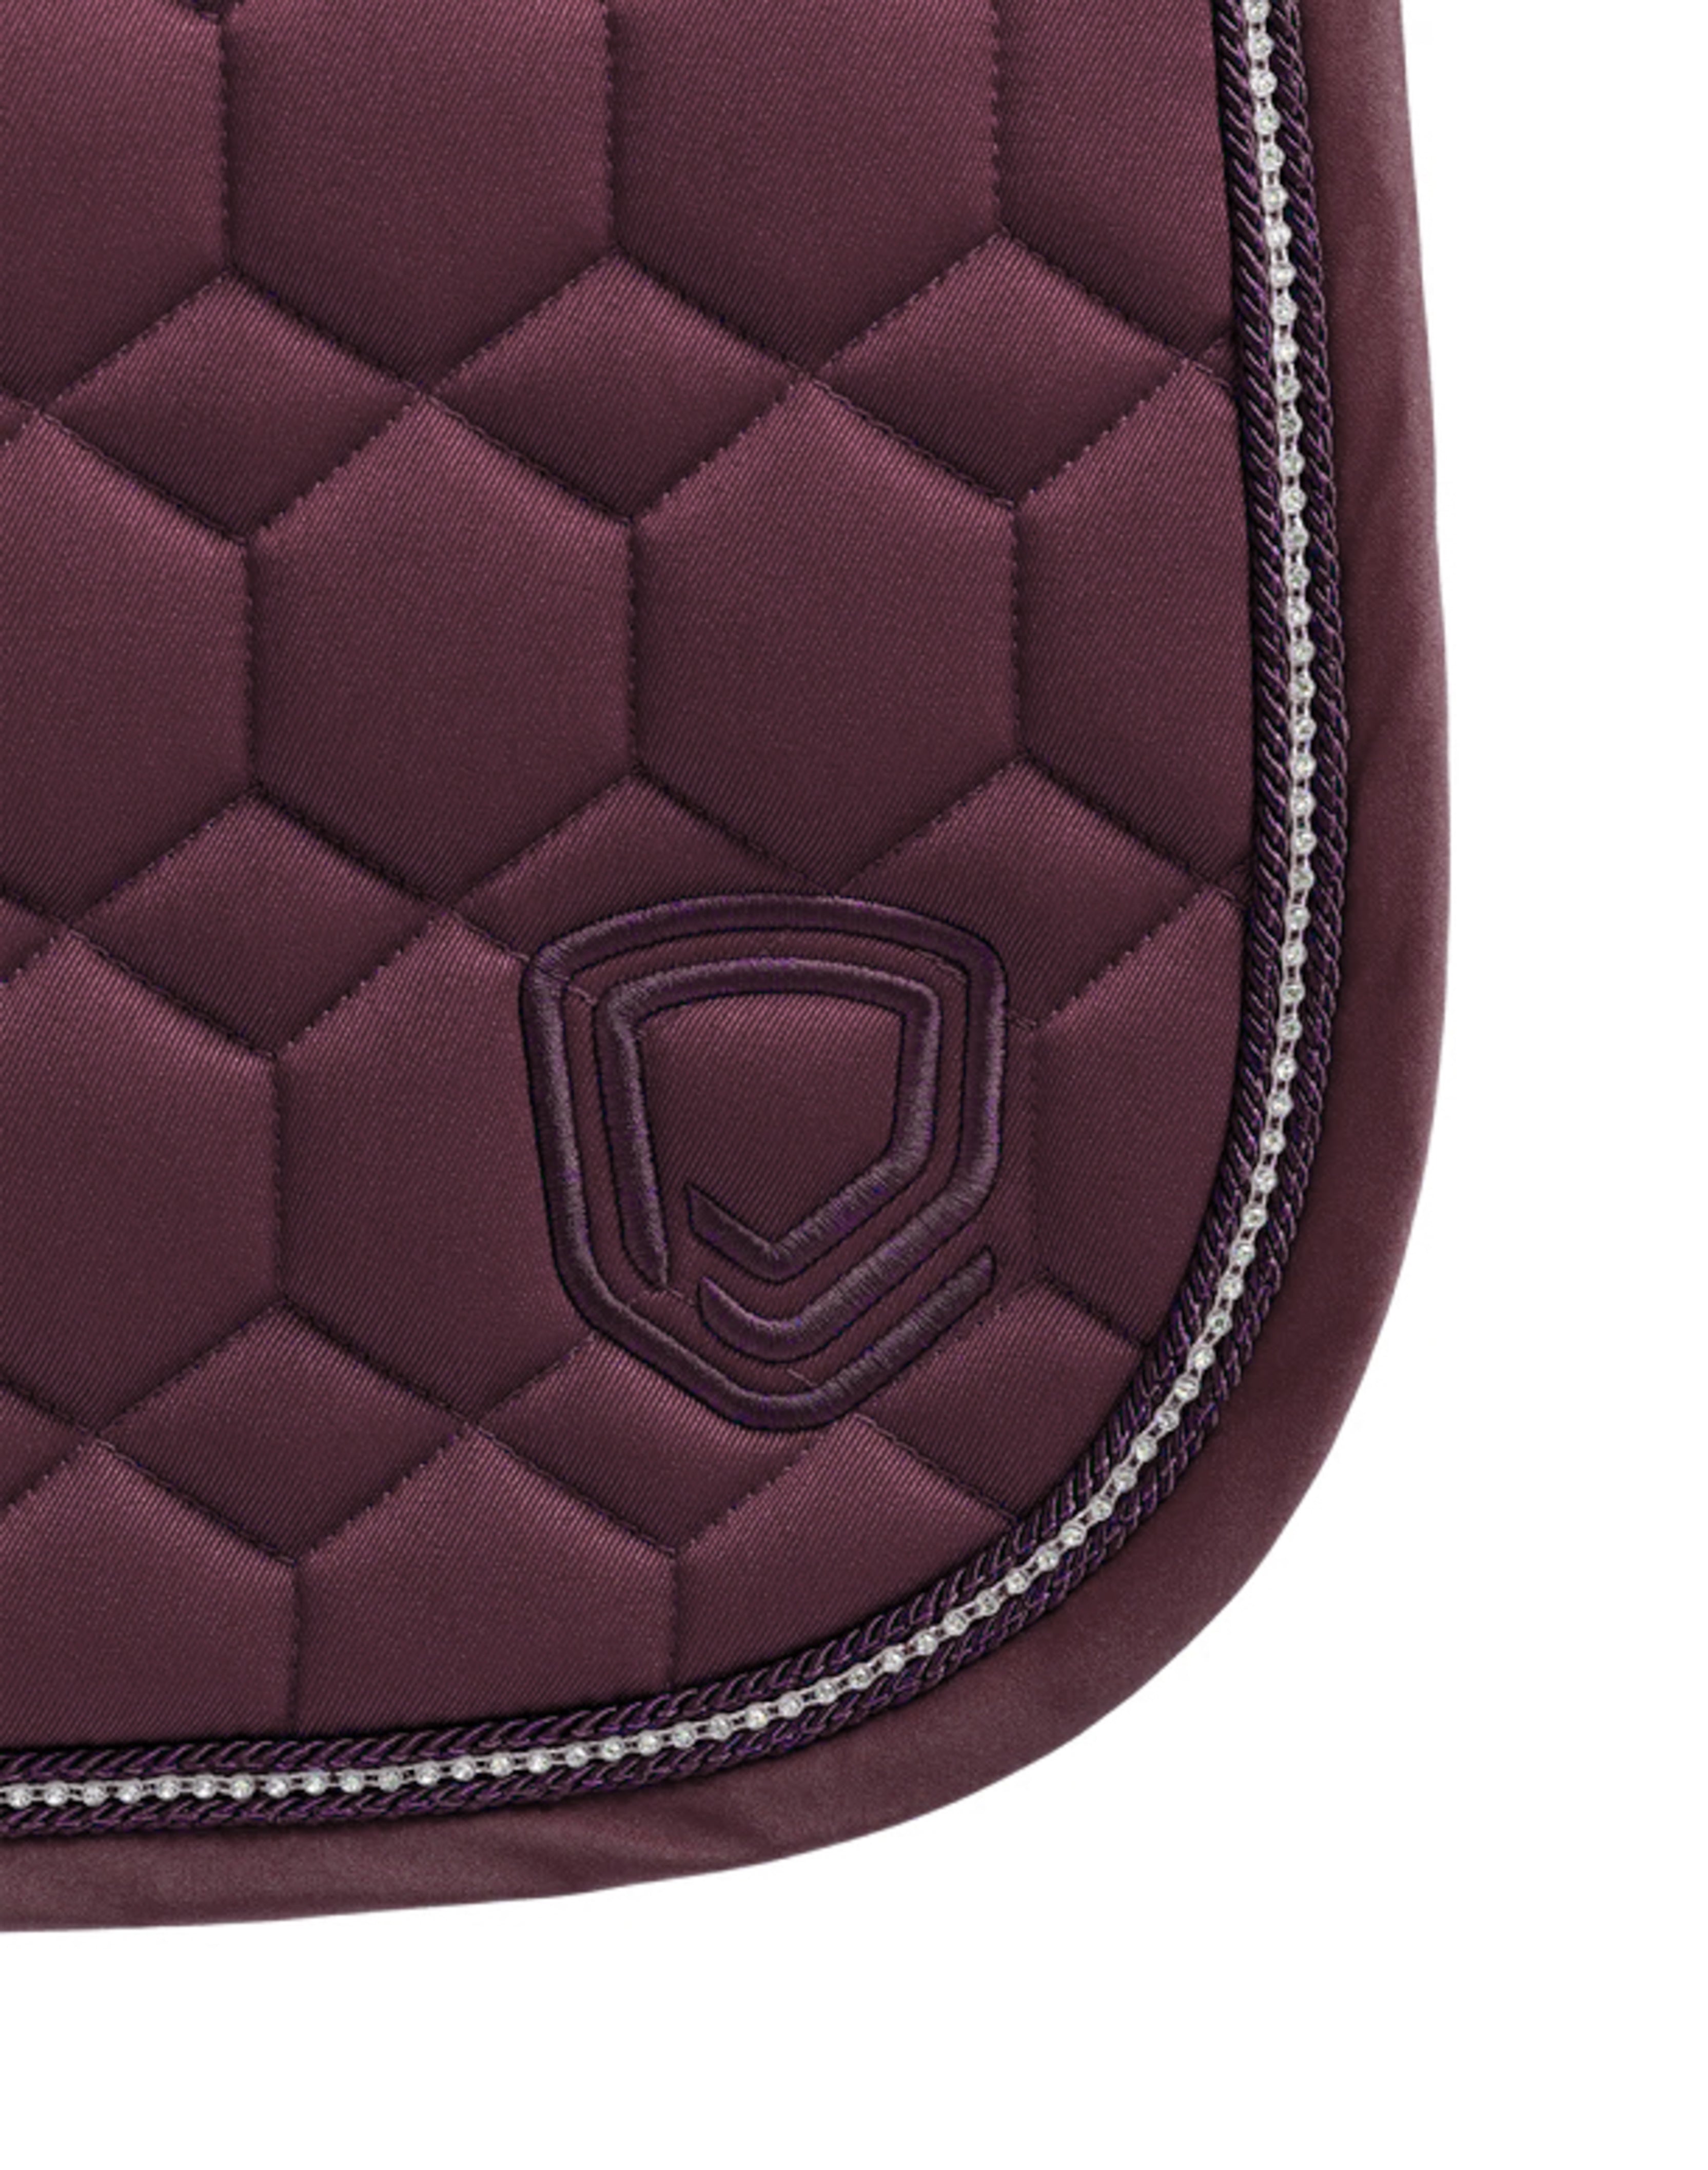 Recycled Jumping/AP Saddle Pad - Deep Cherry